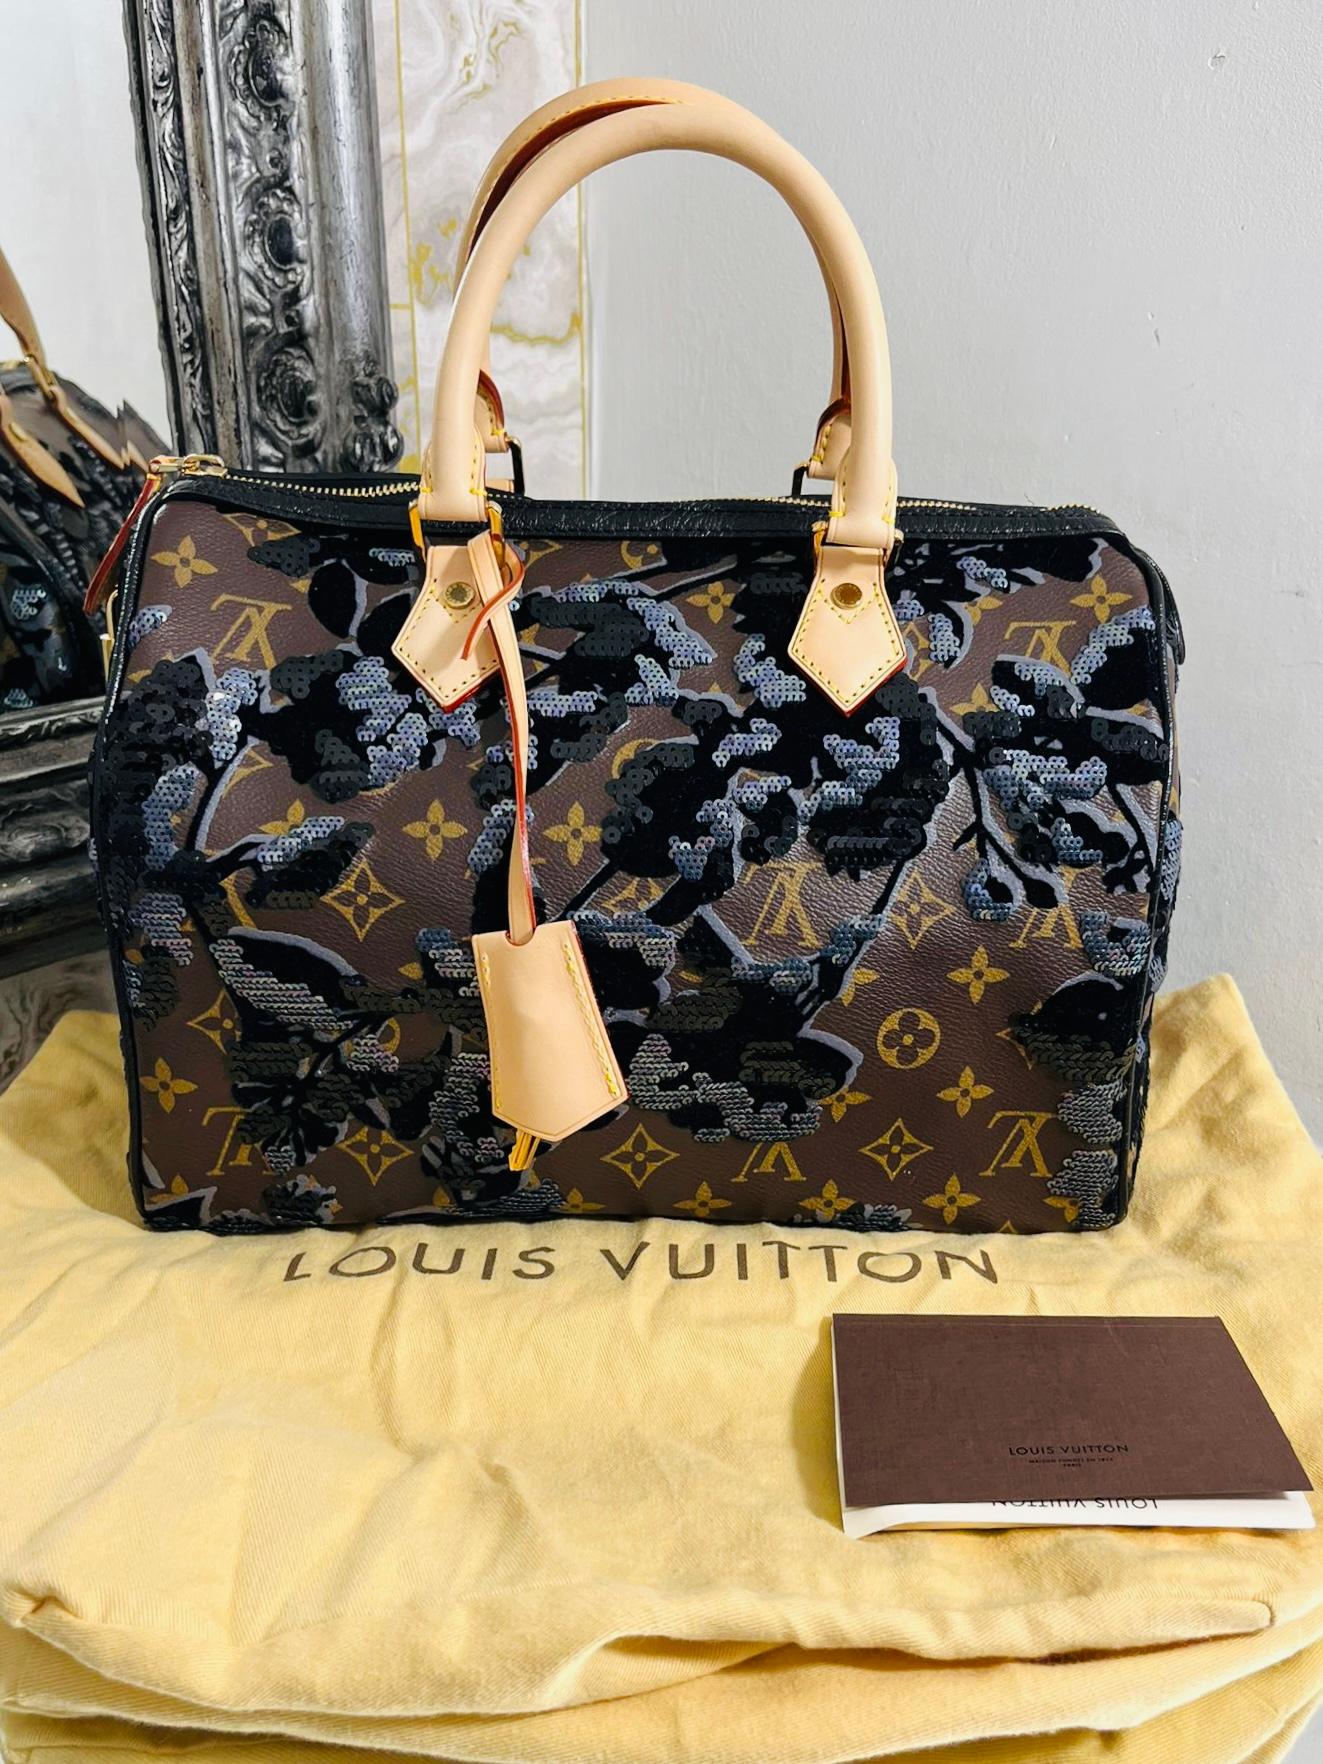 Louis Vuitton Sequin, Velvet & Coated Canvas Fleur De Jais Speedy 30 Bag

From fall 2010 is this Speedy ltd edition bag with gold zipper closure, leather 

roll top handles, key, lock and clochette.

'LV' logo though out with black sequin and velvet